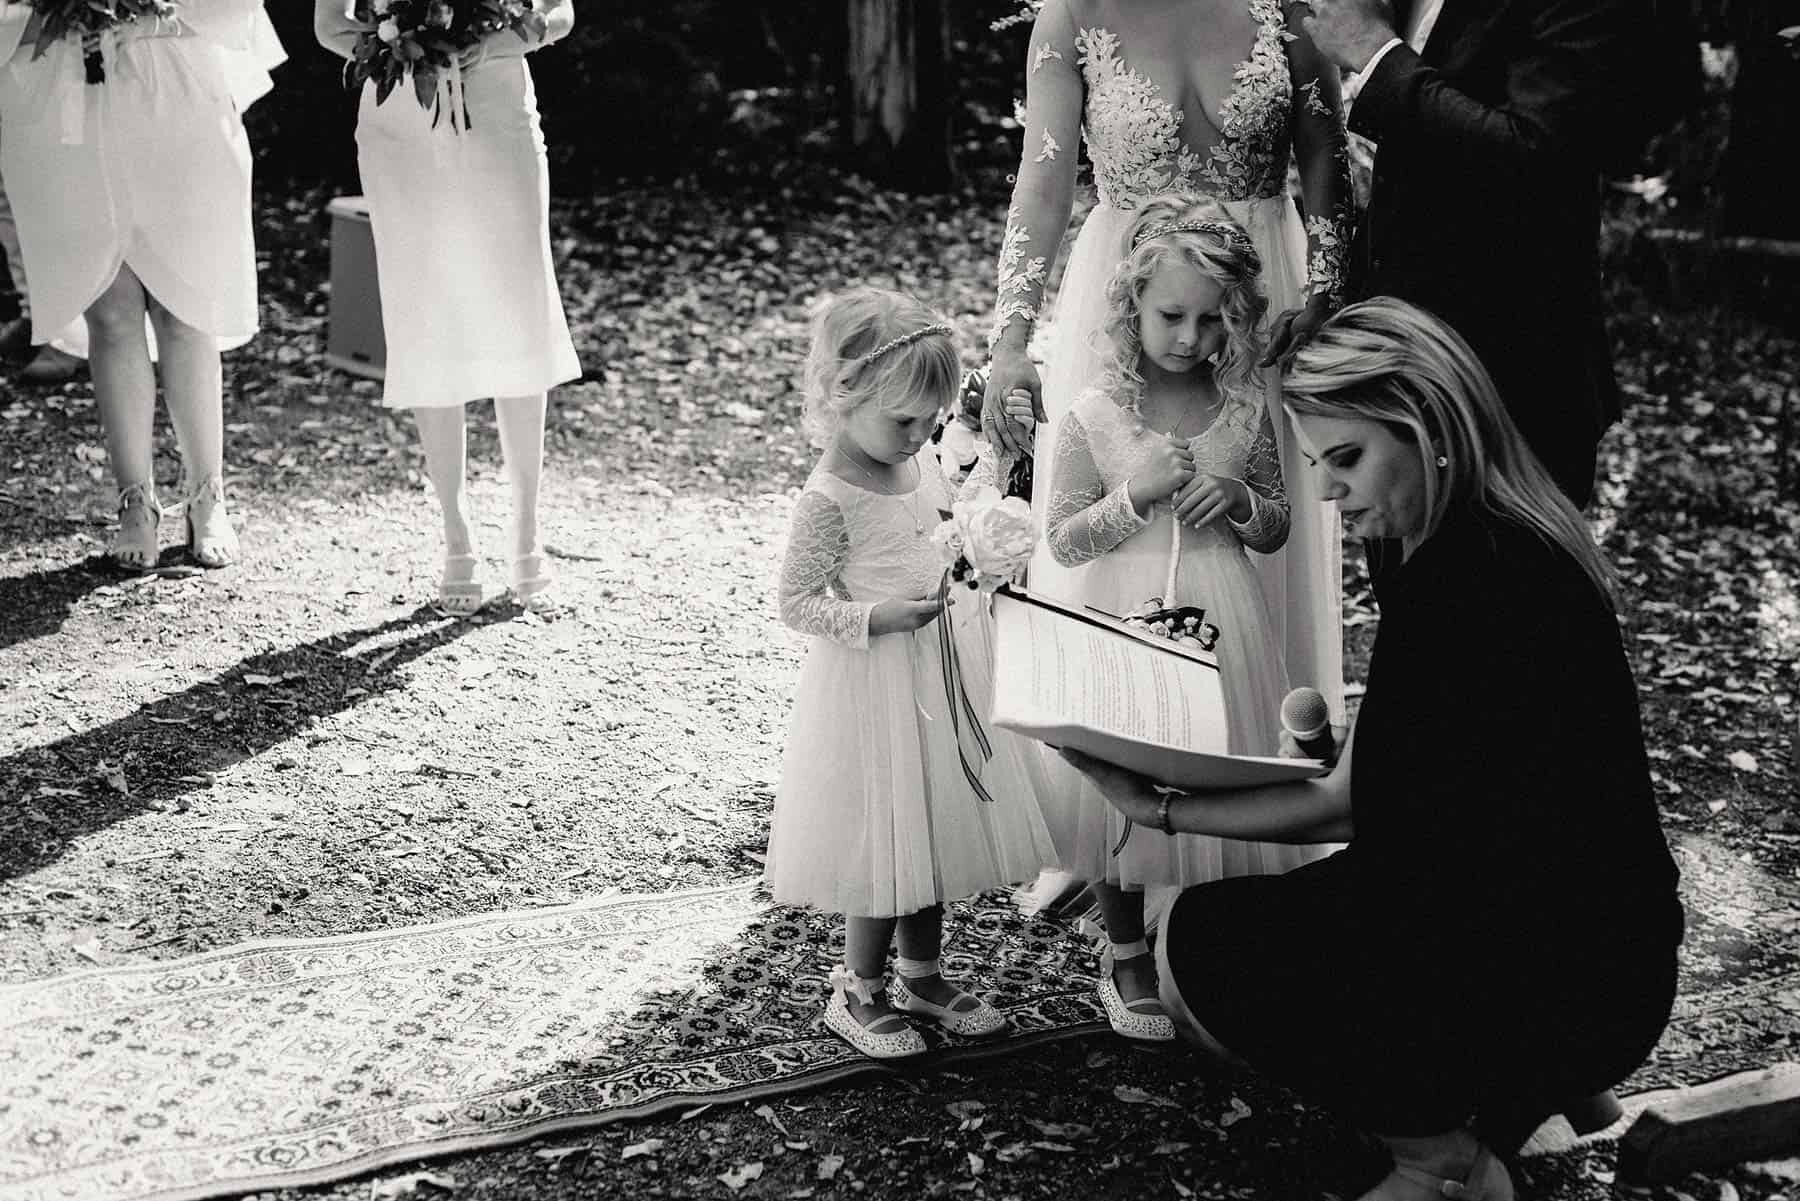 Celebrant includes flower girls in ceremony at rustic forest wedding